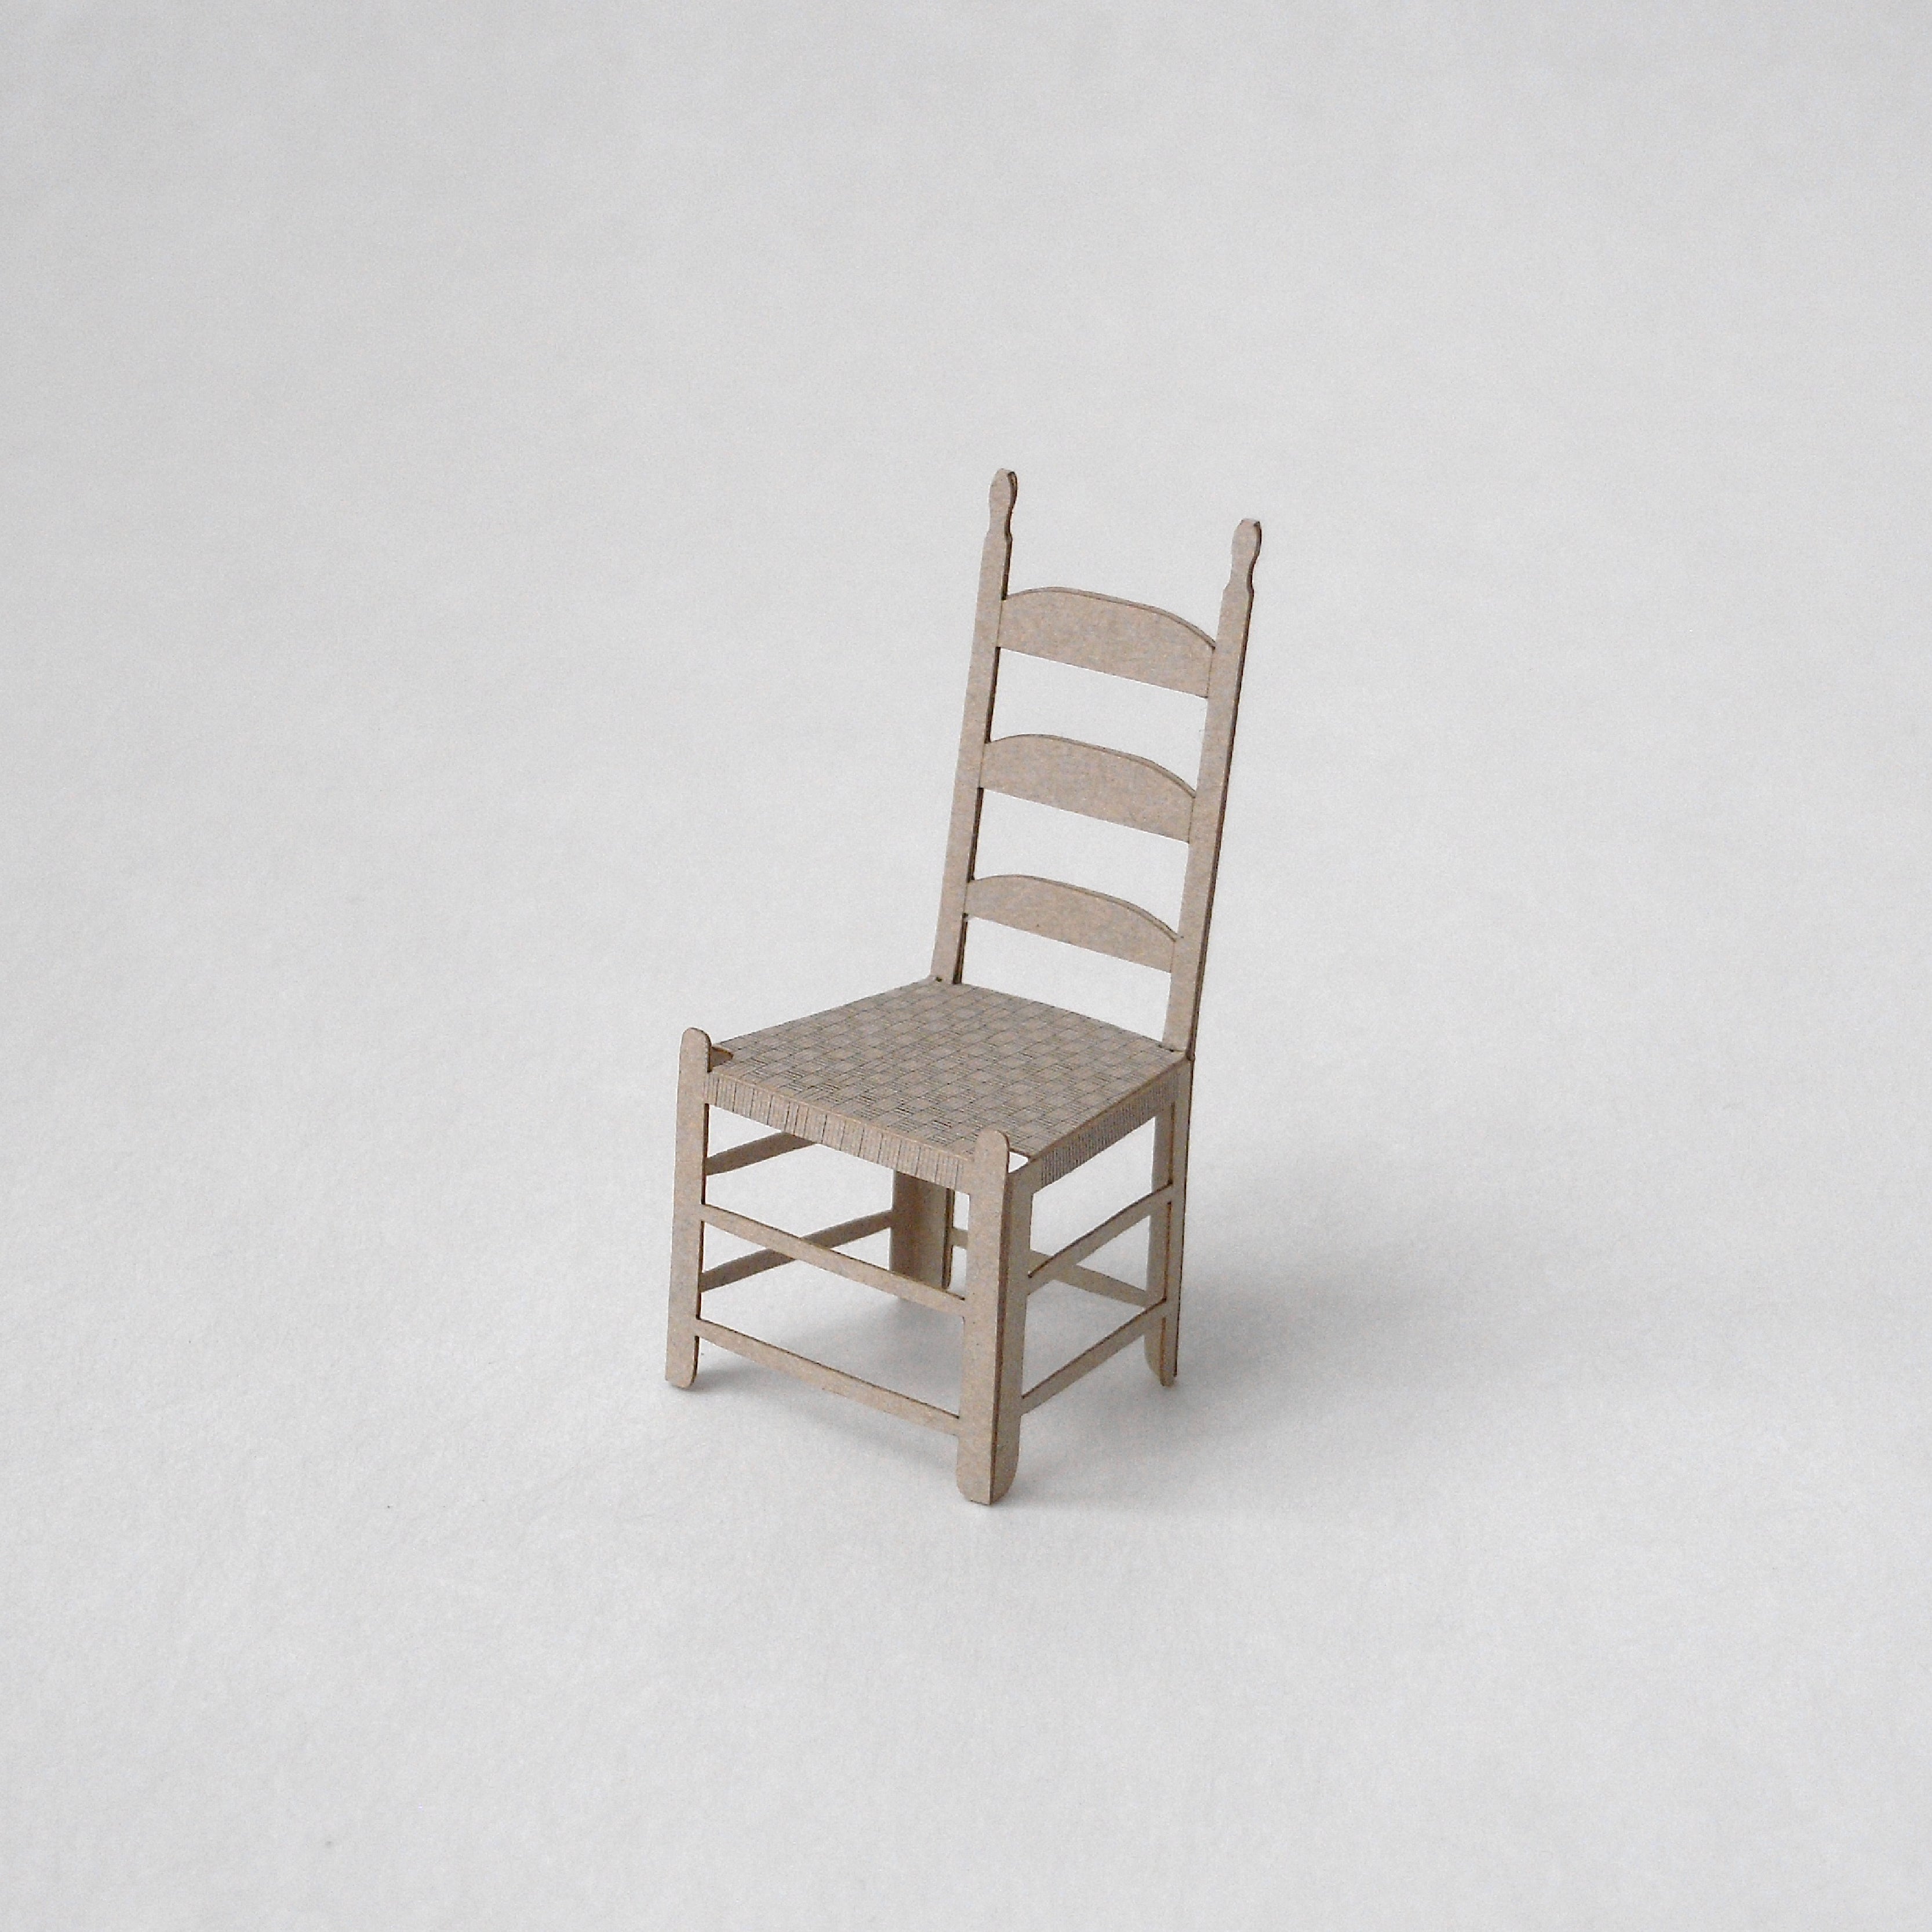 002 Shaker chair / シェーカーチェア